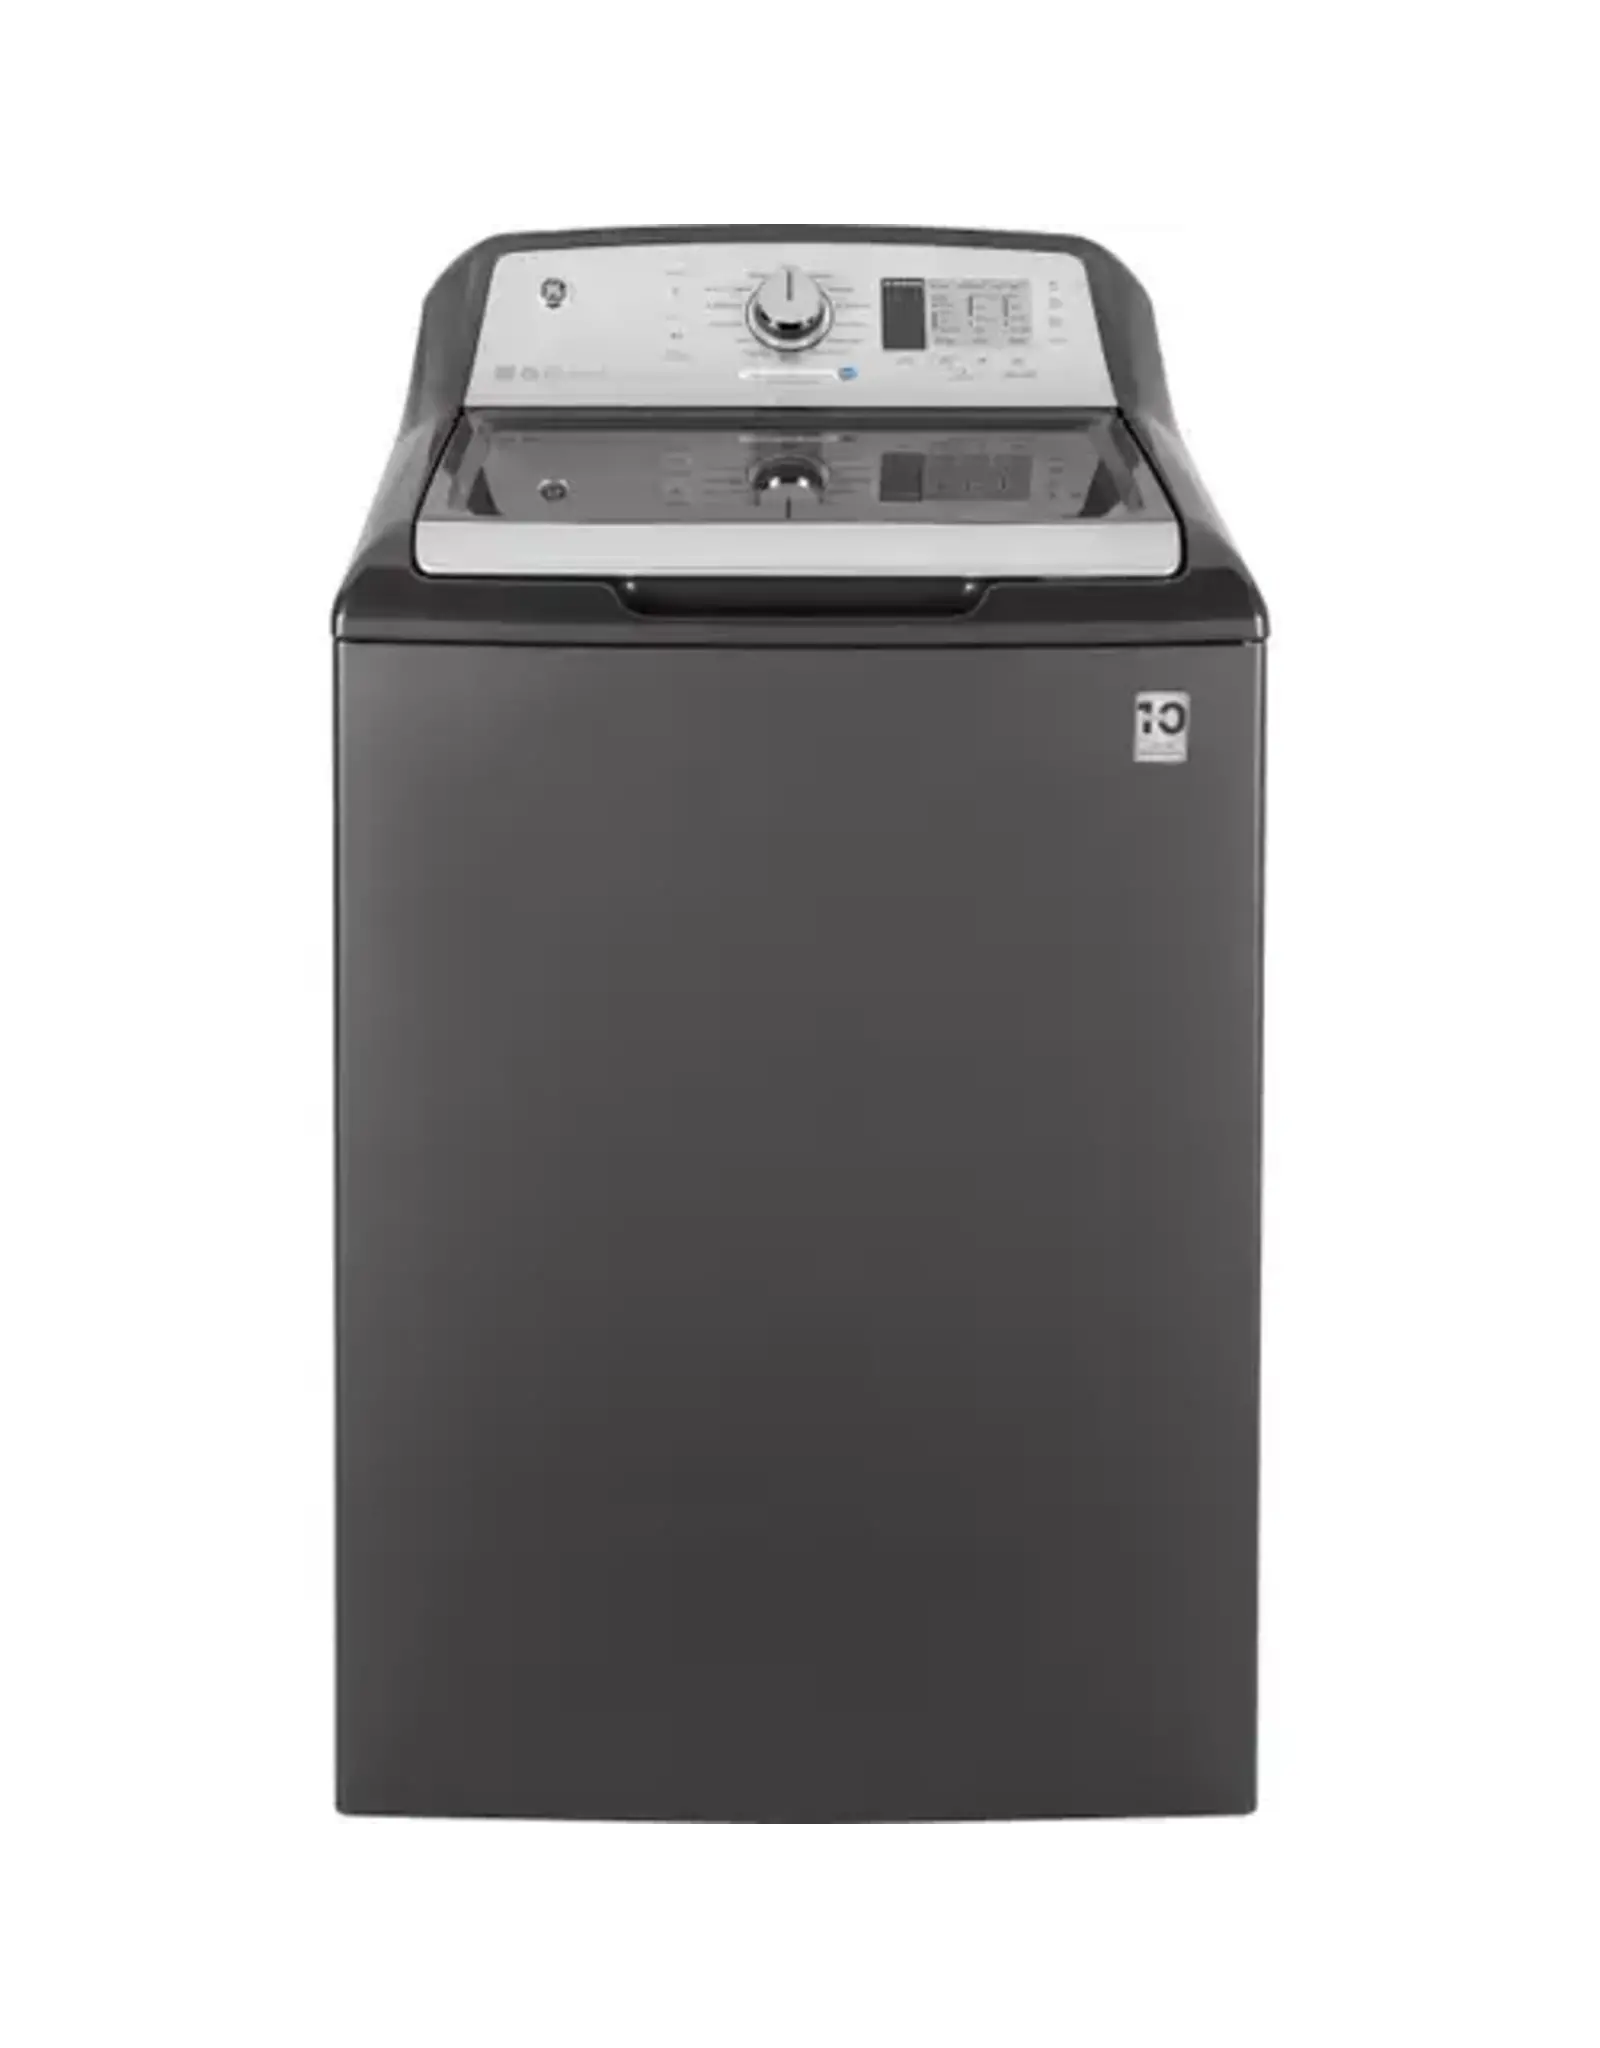 GE GTW685BPLDG-GE® ENERGY STAR® 4.5 cu. ft. Capacity Washer with Stainless Steel Basket